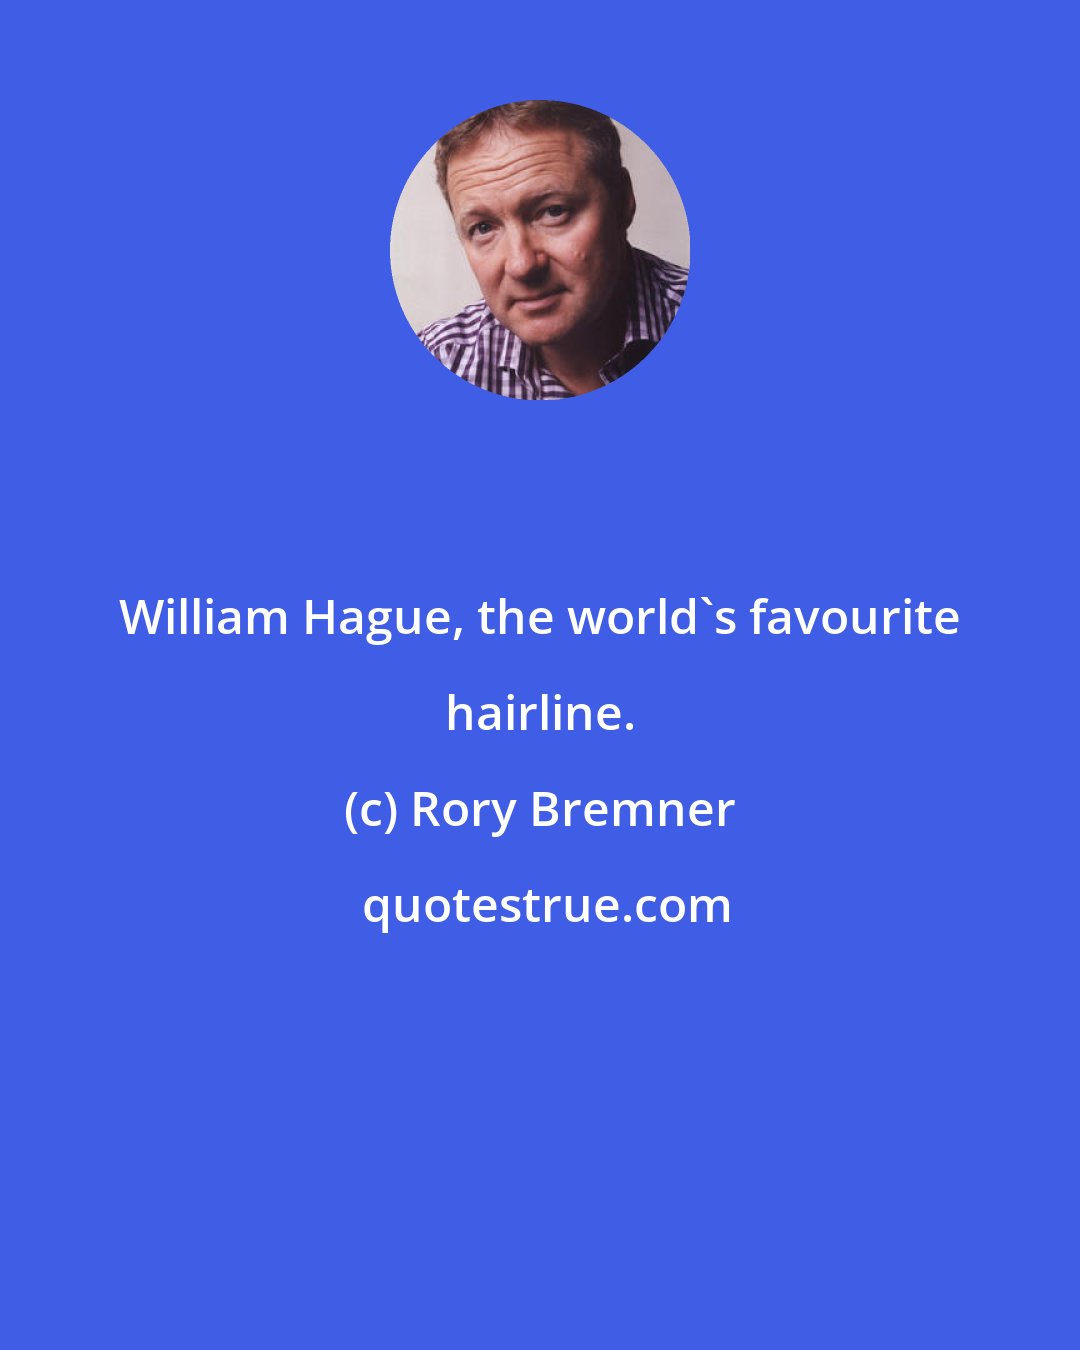 Rory Bremner: William Hague, the world's favourite hairline.